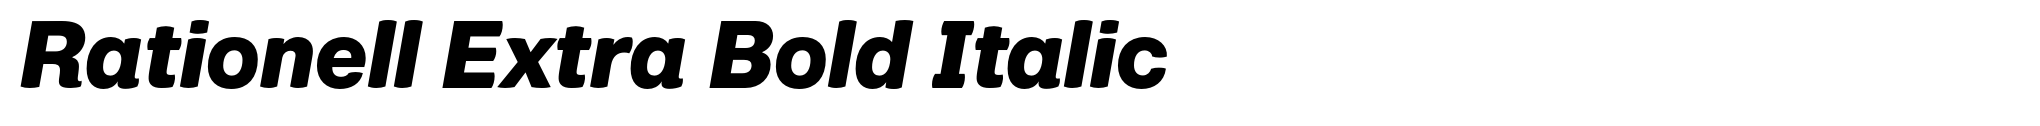 Rationell Extra Bold Italic image